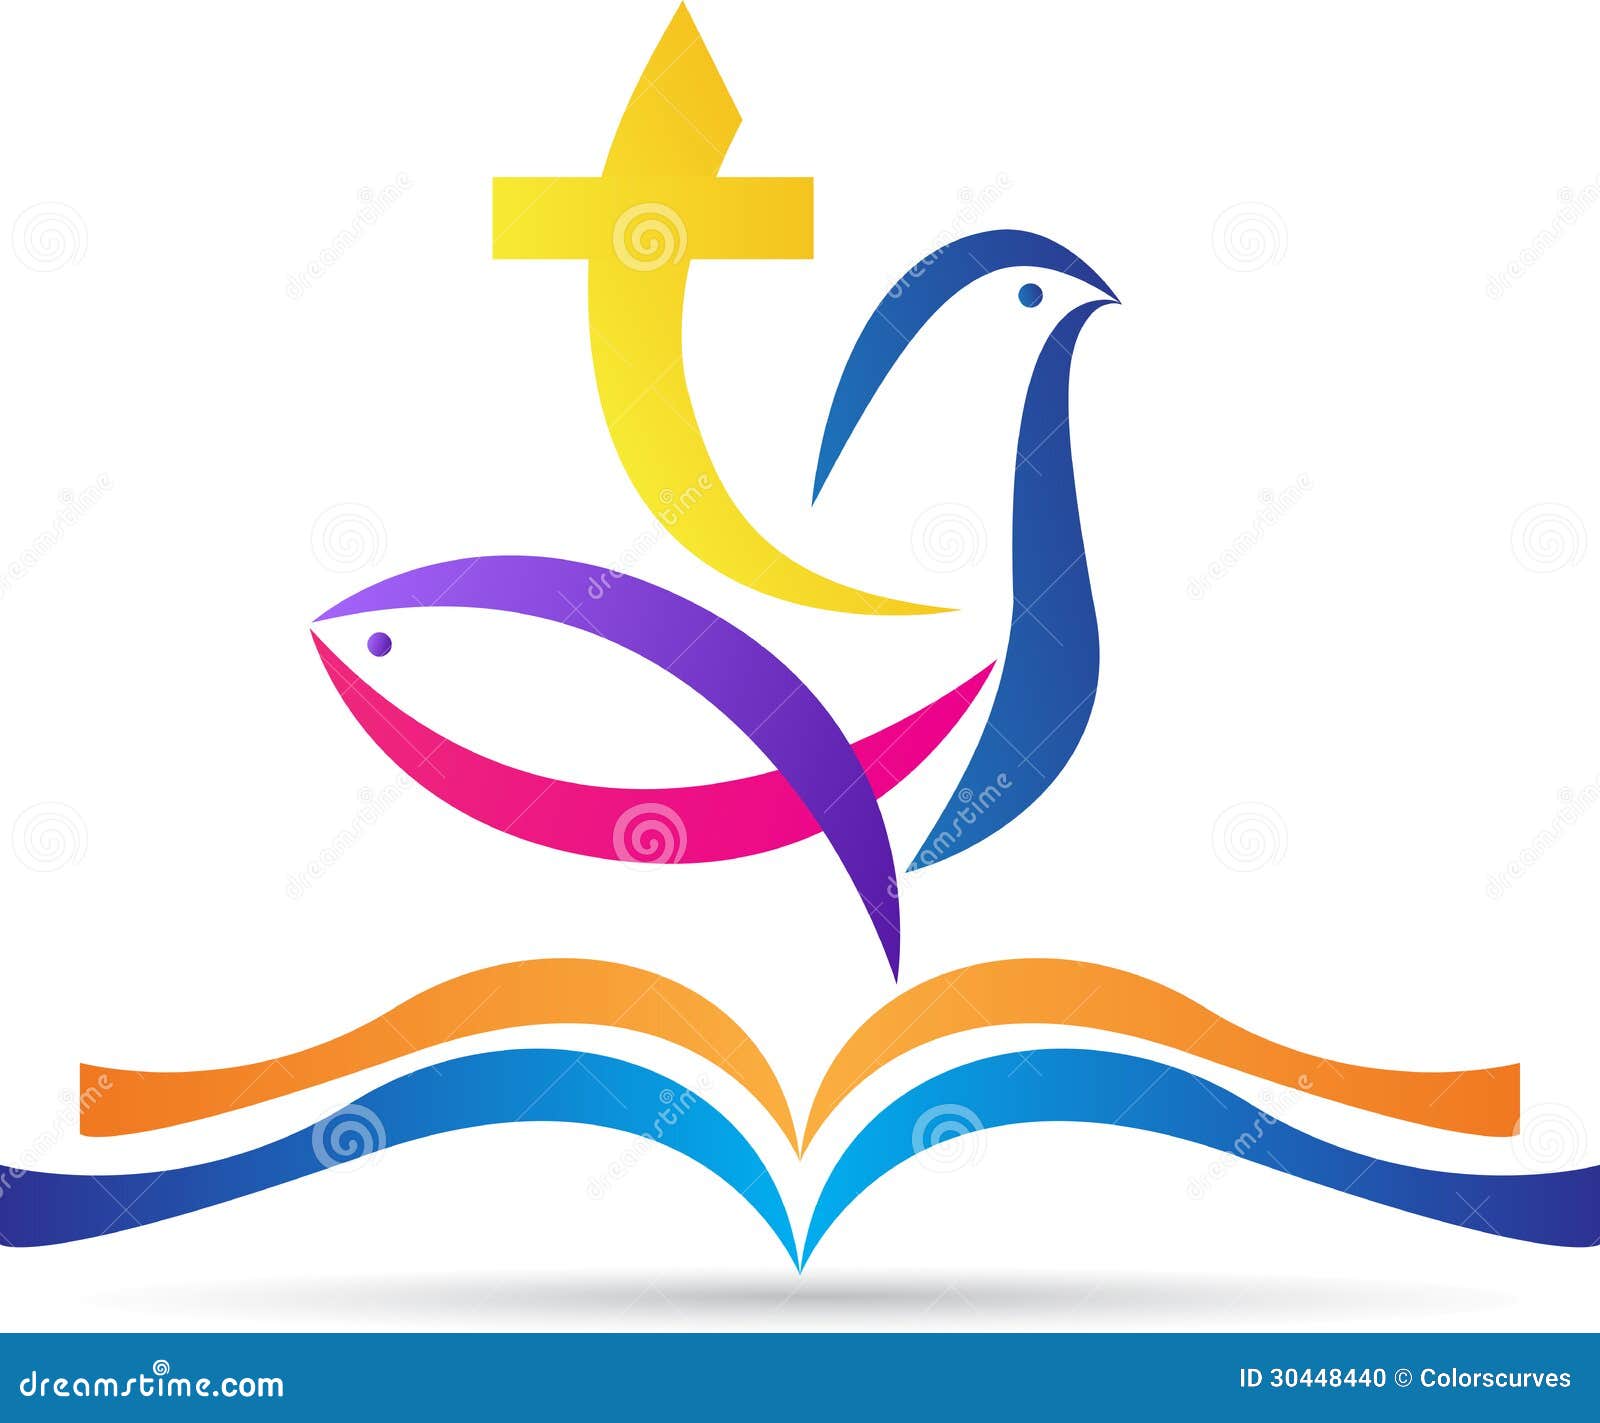 holy bible with cross dove fish